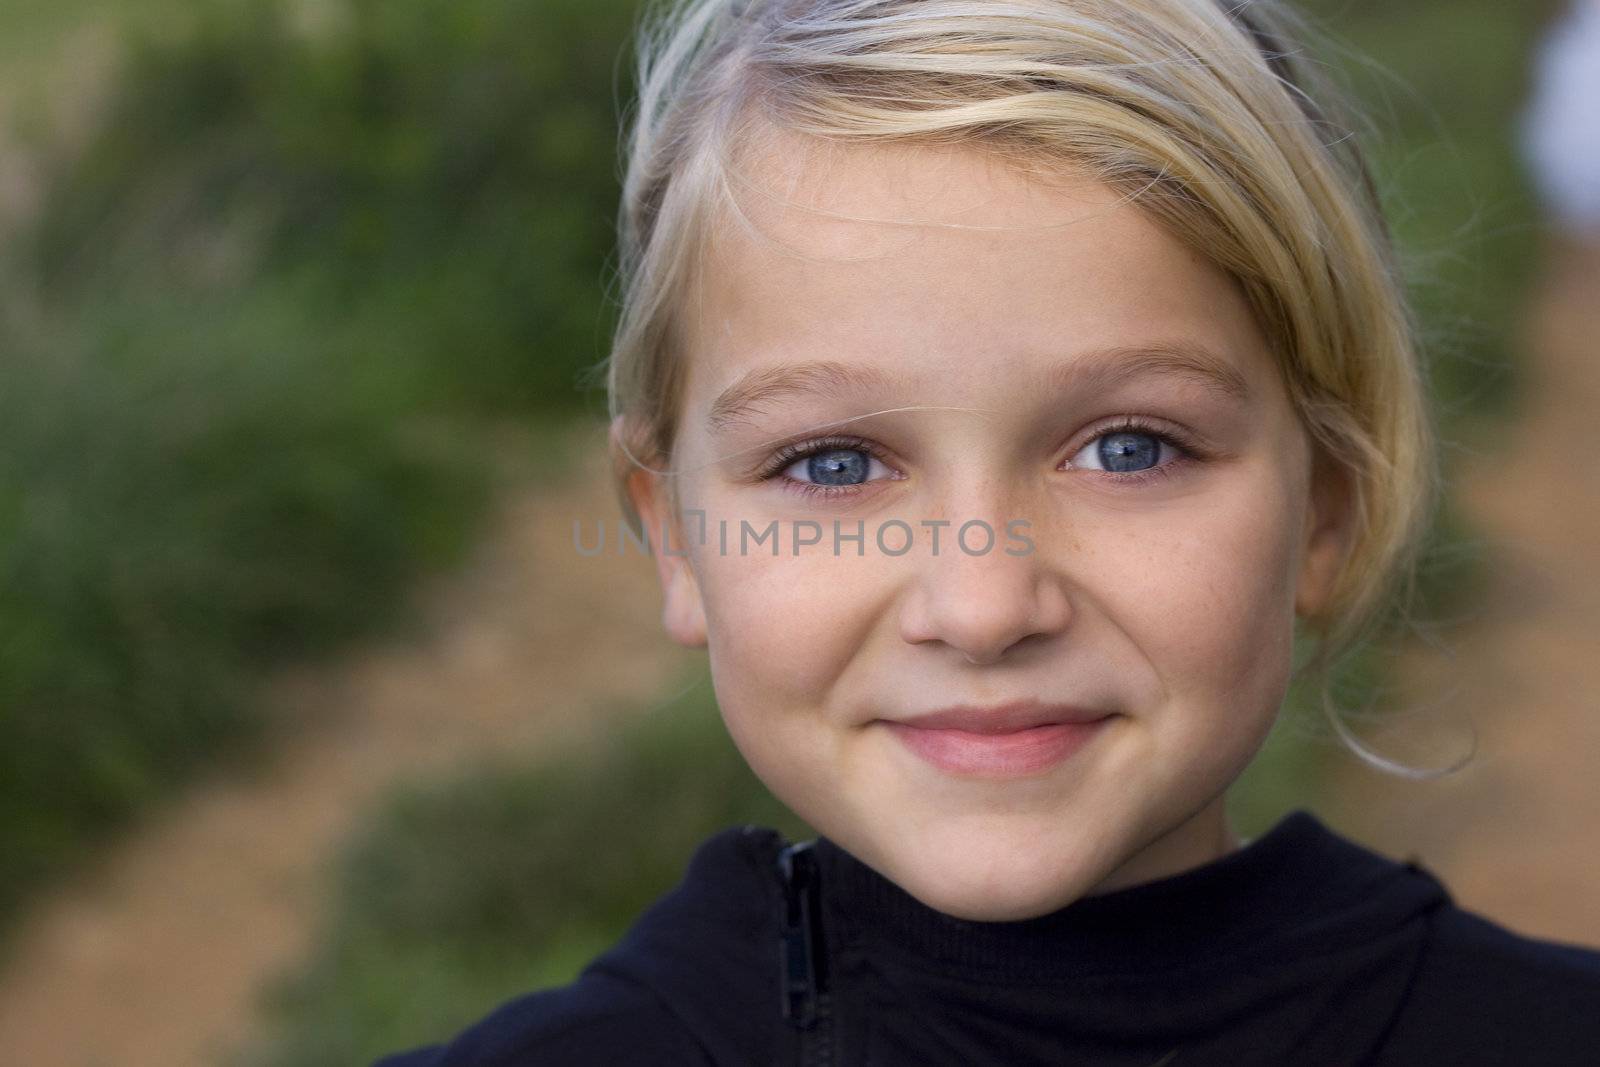 Smiling girl by annems